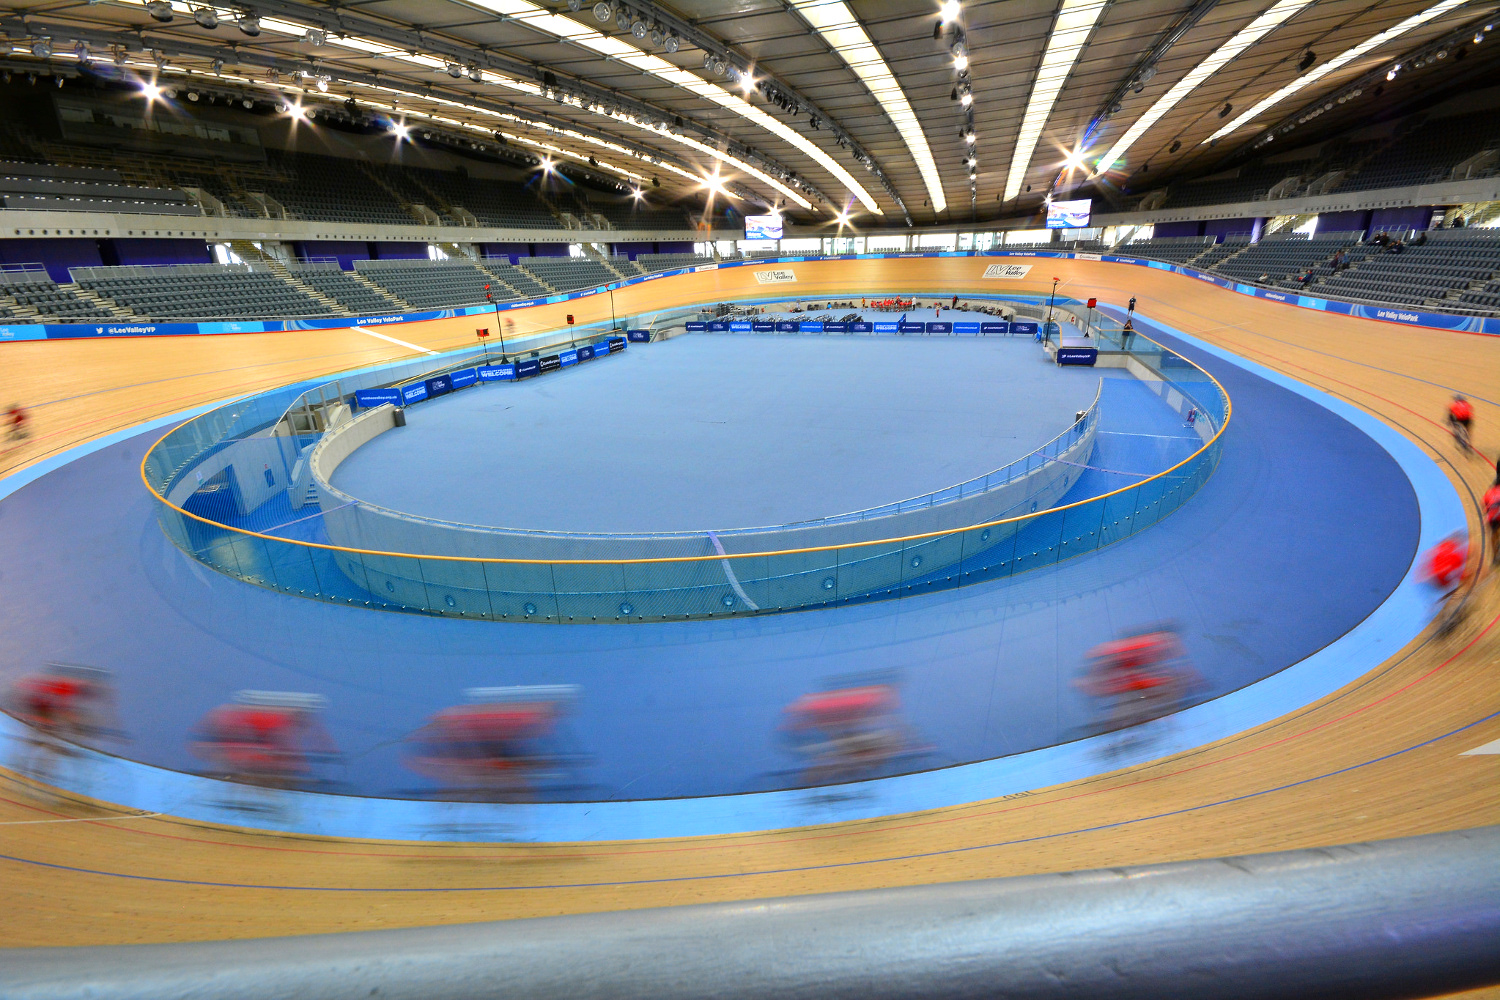 The velodrome at Lee Valley Velopark. Image by Martin Pettitt / CC BY 2.0